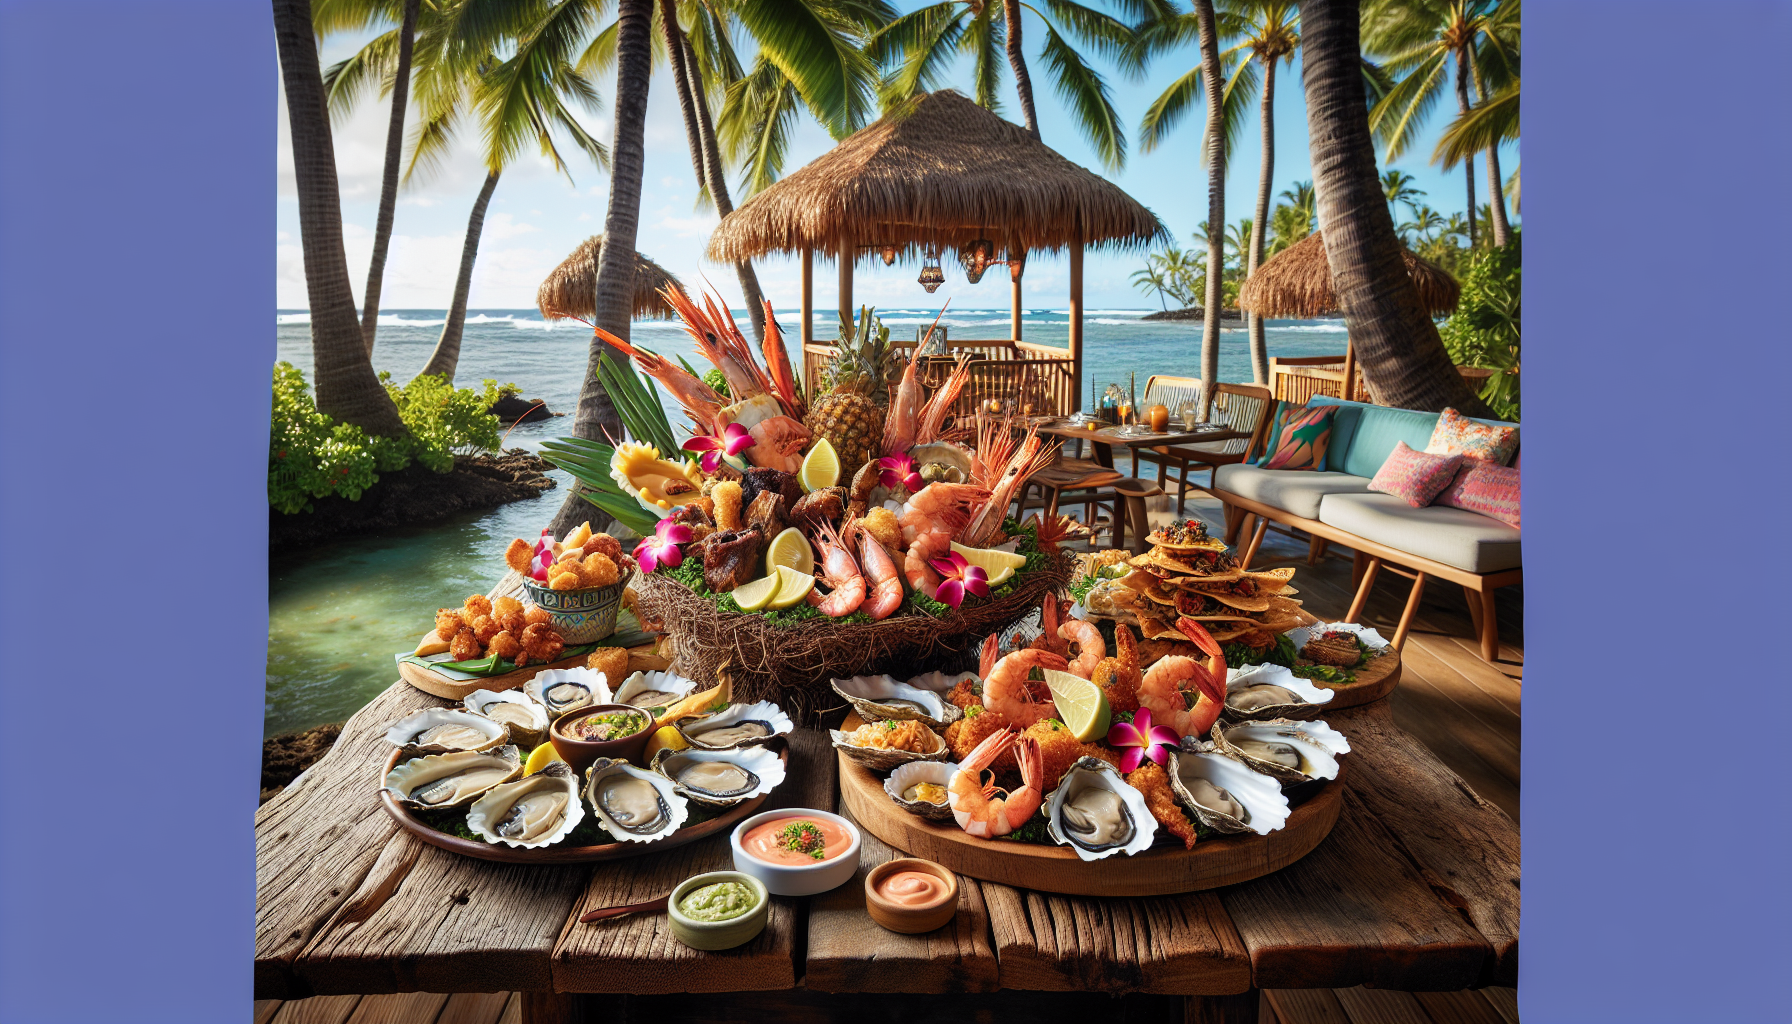 The Main Event: Dinner Delicacies: Indulge in Tiki Tiki's dinner menu, featuring chilled seafood platter, peel-n-eat shrimp, coconut shrimp, and Ahi Tuna Nachos, with customizable protein options.